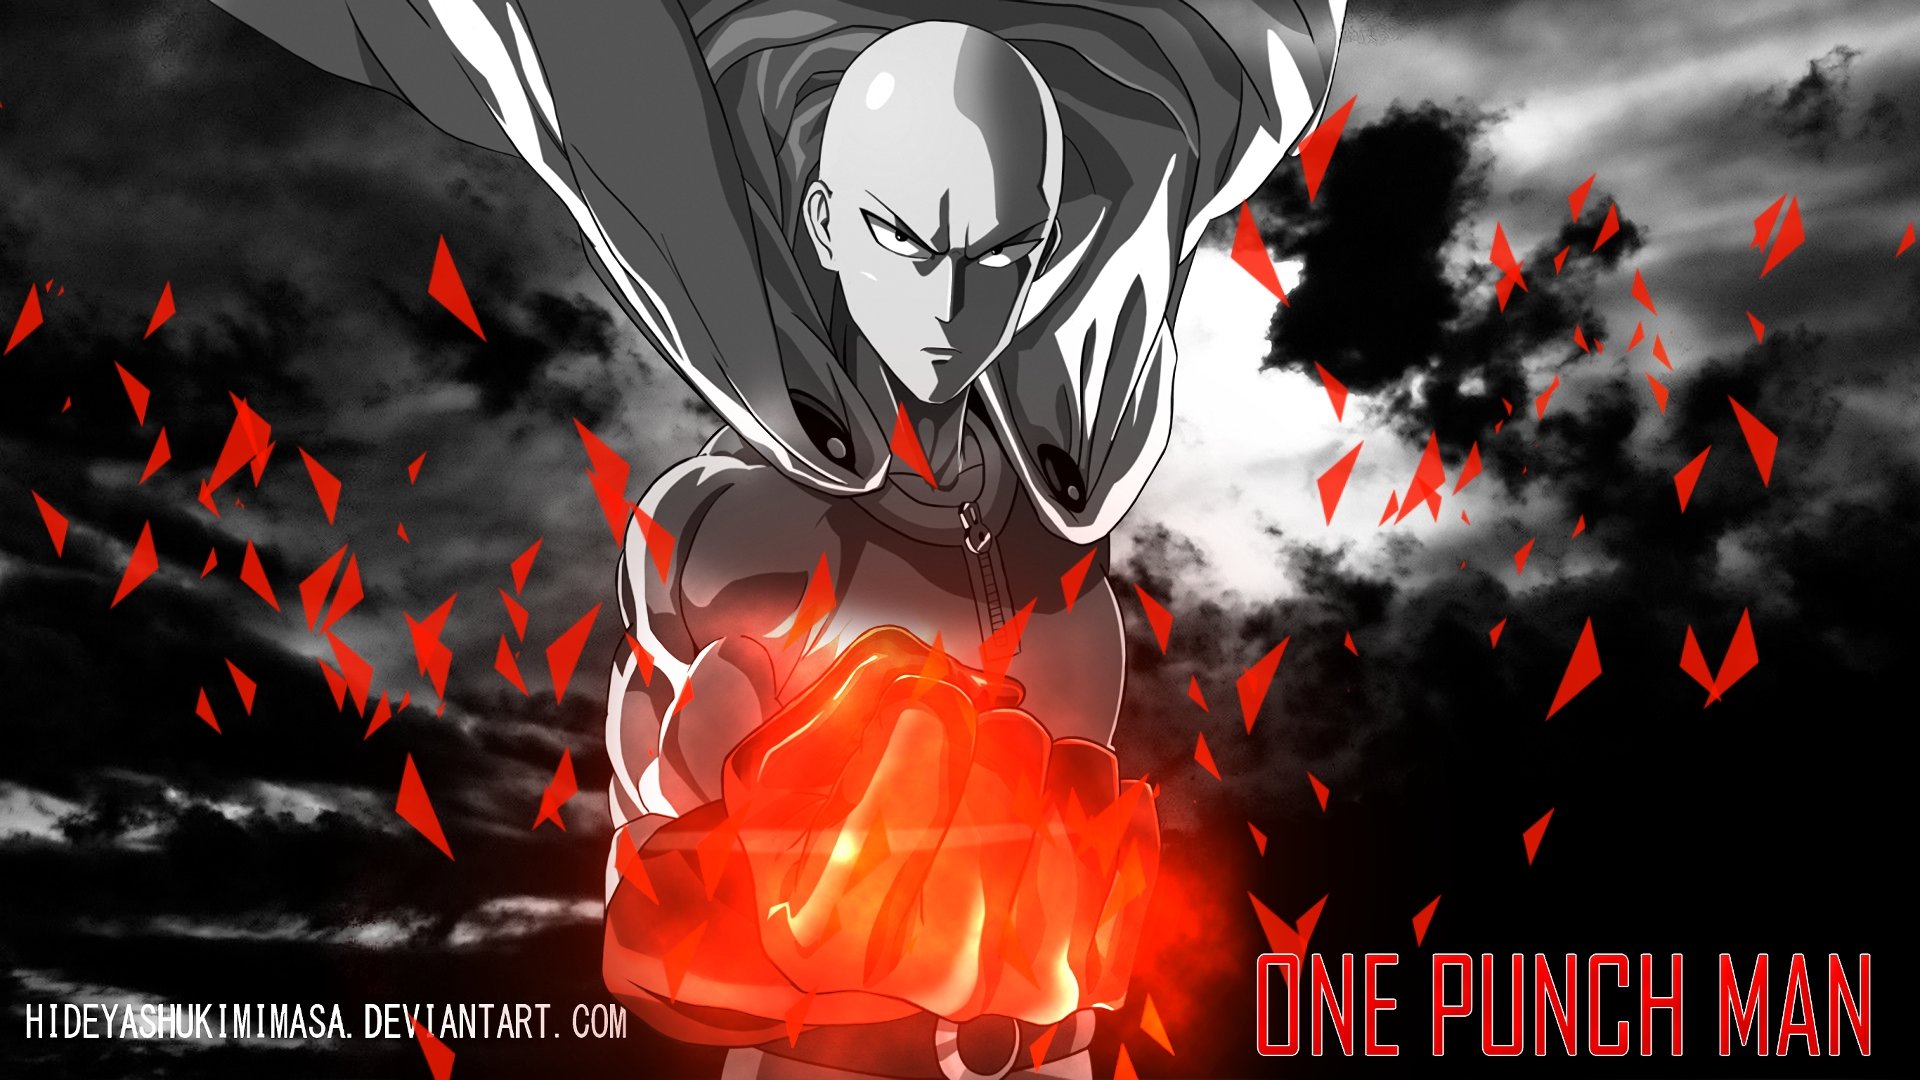 Wallpaper Hd Anime One Punch Man Best hd wallpaper, download best hd desktop wallpapers,widescreen wallpapers for free in high quality resolutions 1920x1080 hd, 1920x1200 you can download iphone wallpaper, adroid wallpaper, nokia wallpaper, desktop wallpaper, samsung wallpaper, black wallpaper, white. wallpaper hd anime one punch man